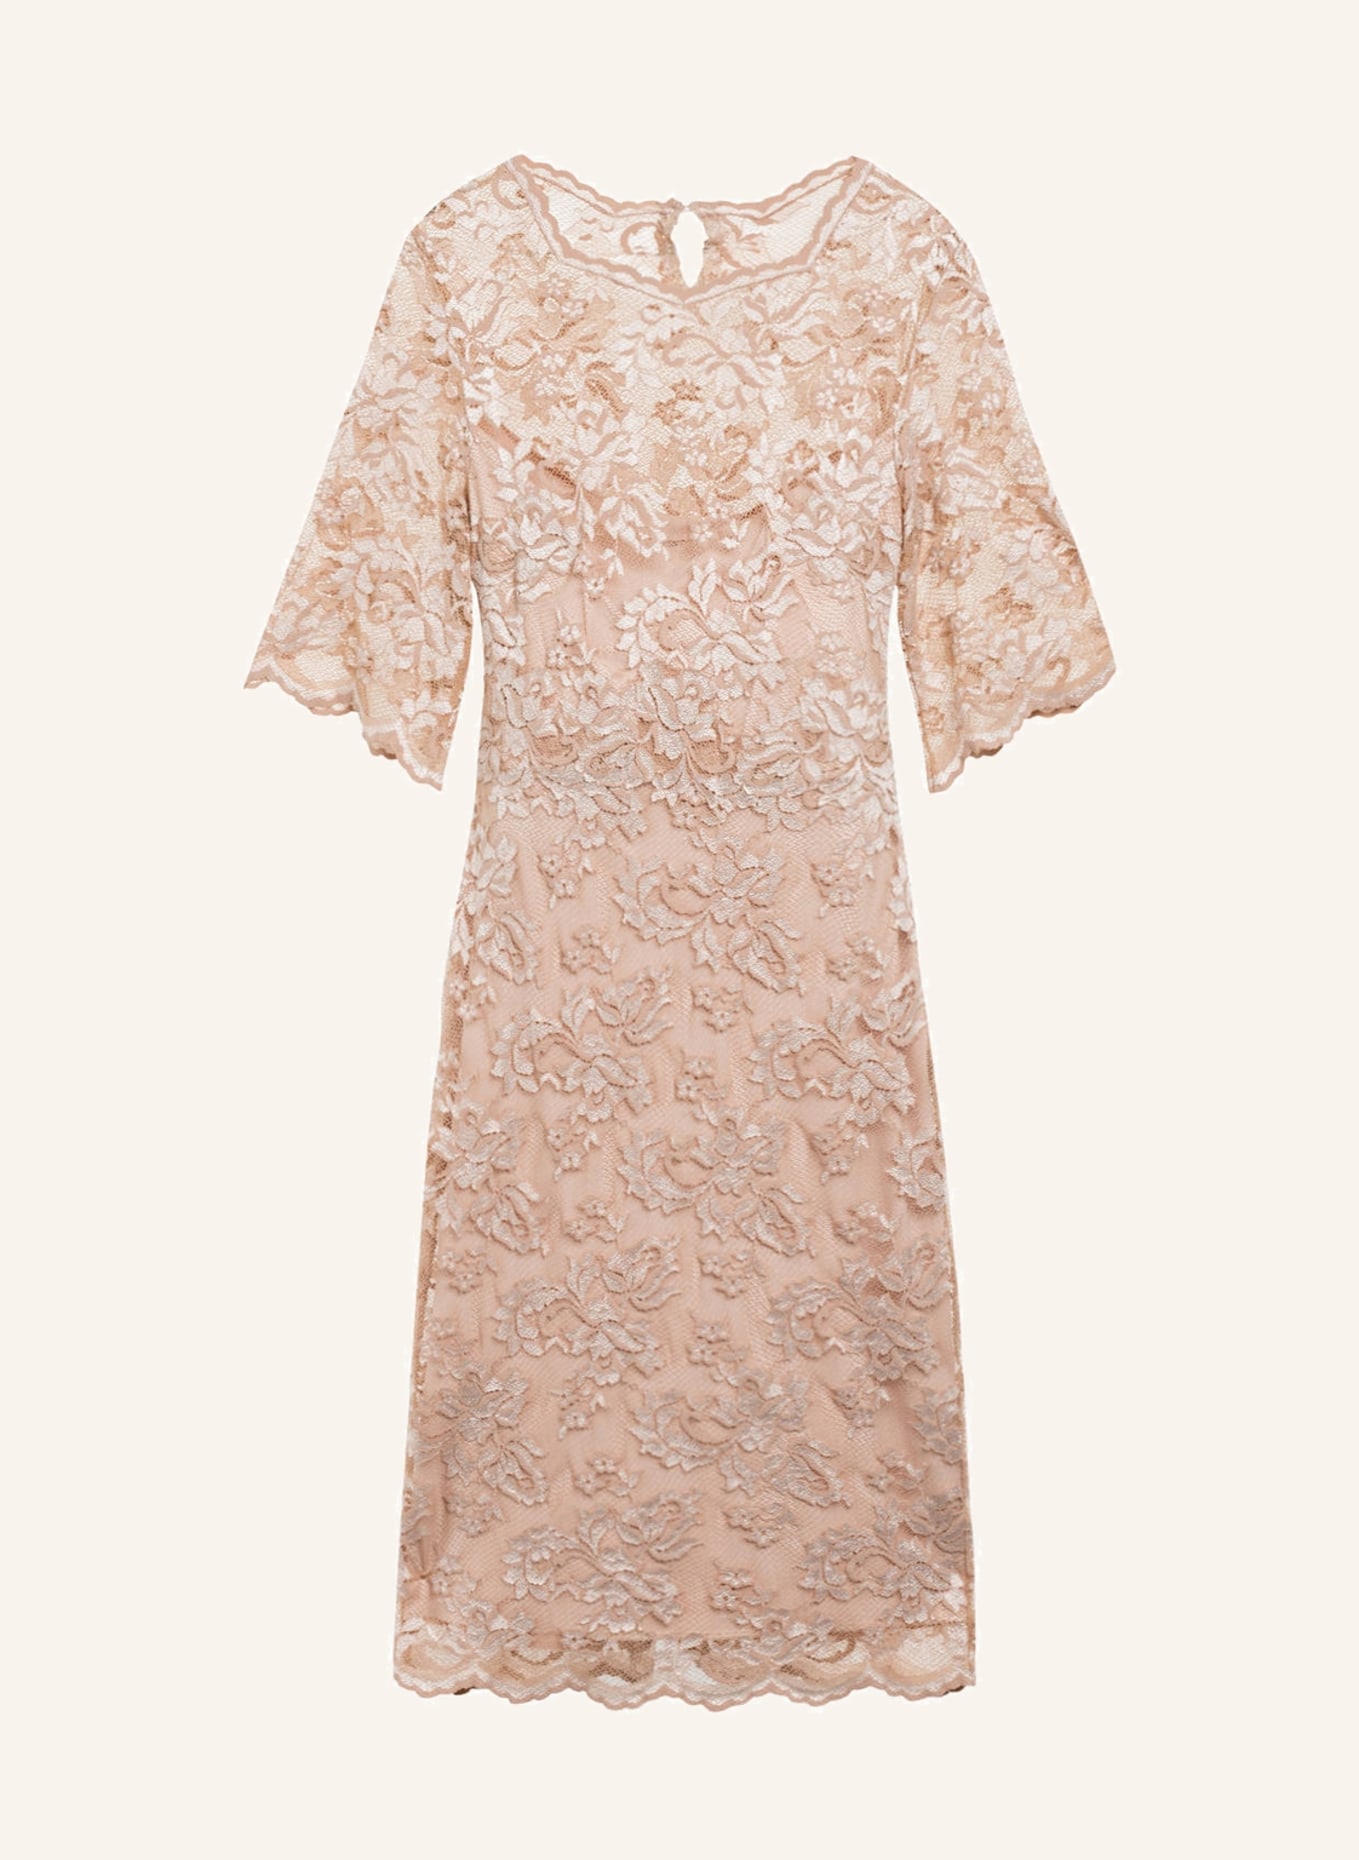 OLVI'S Lace dress with 3/4 sleeve, Color: NUDE (Image 1)